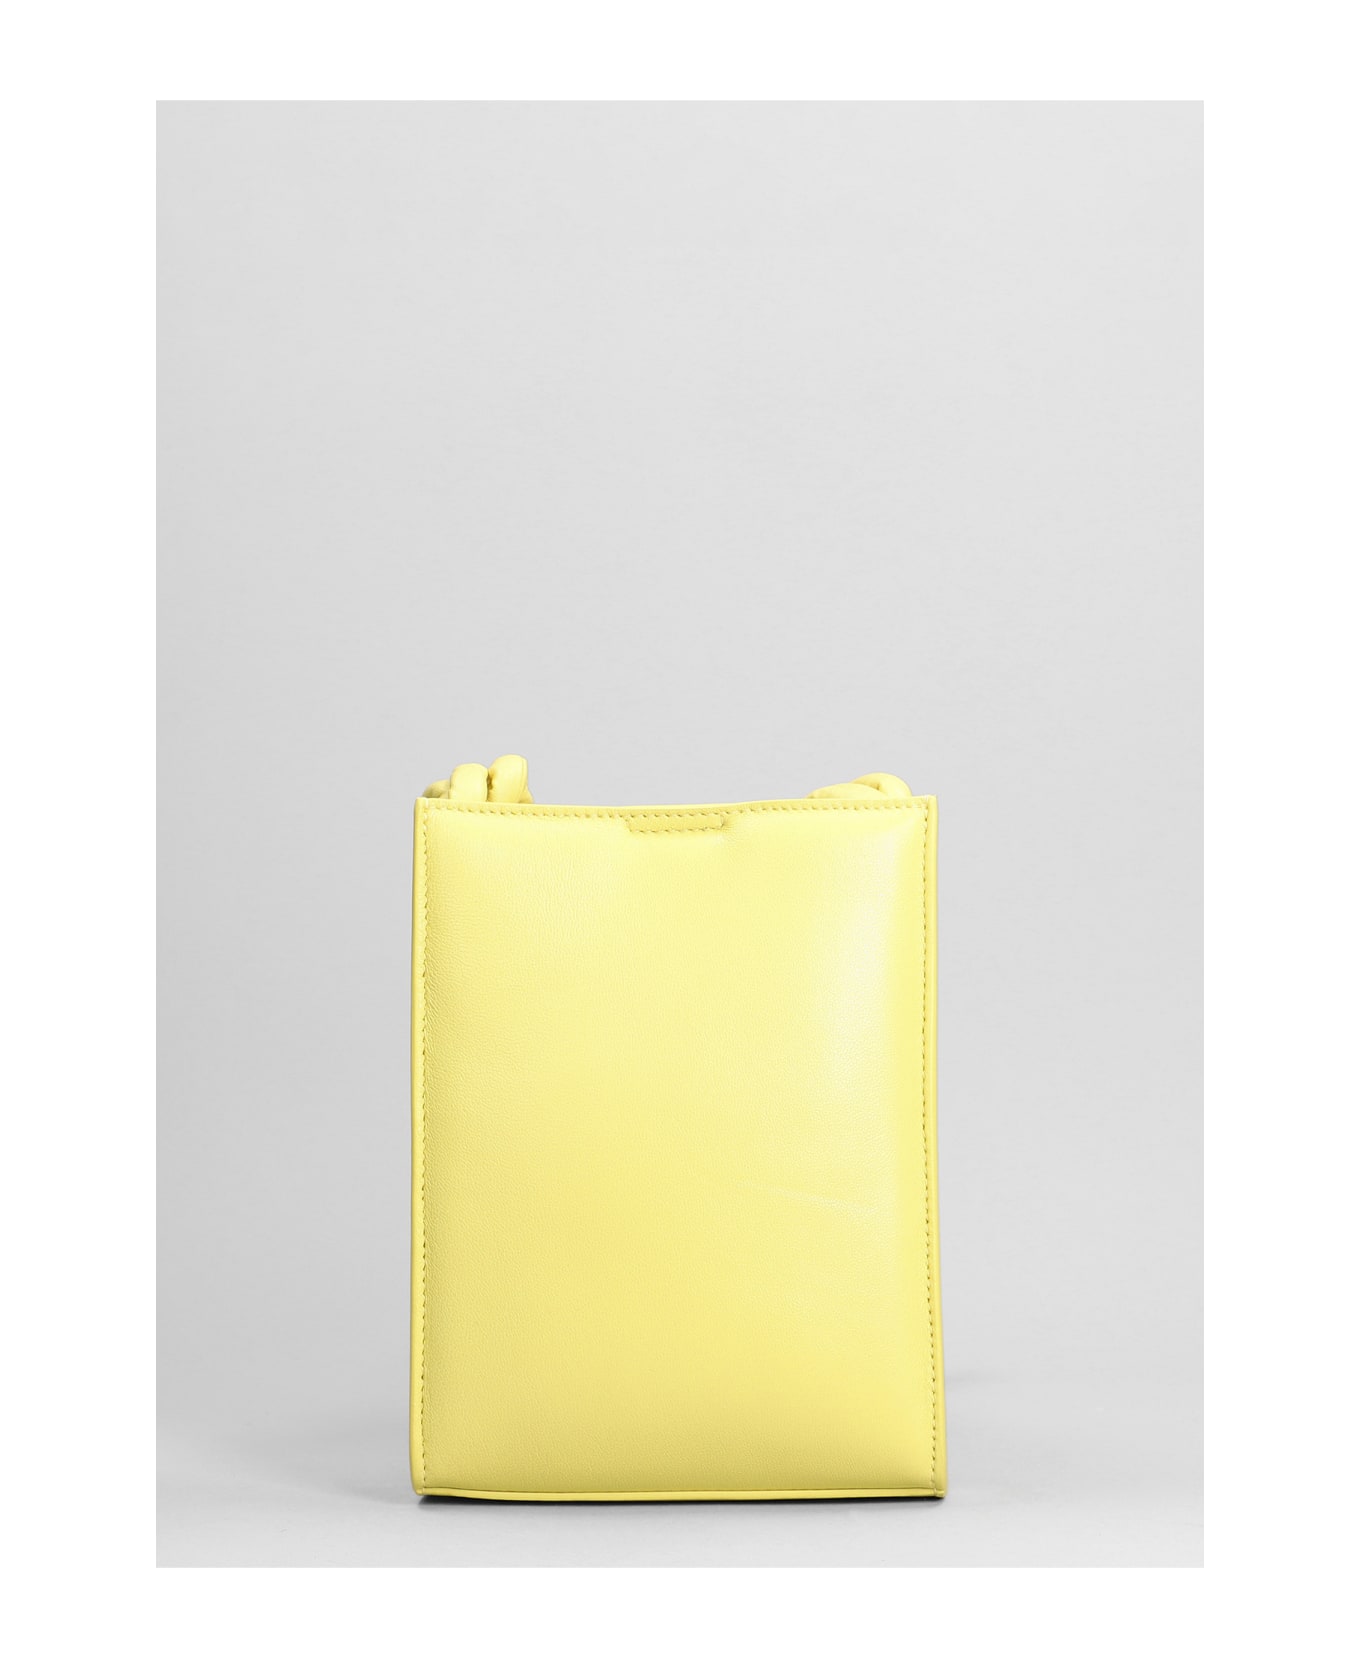 Jil Sander Tangle Sm Shoulder Bag In Yellow Leather - yellow